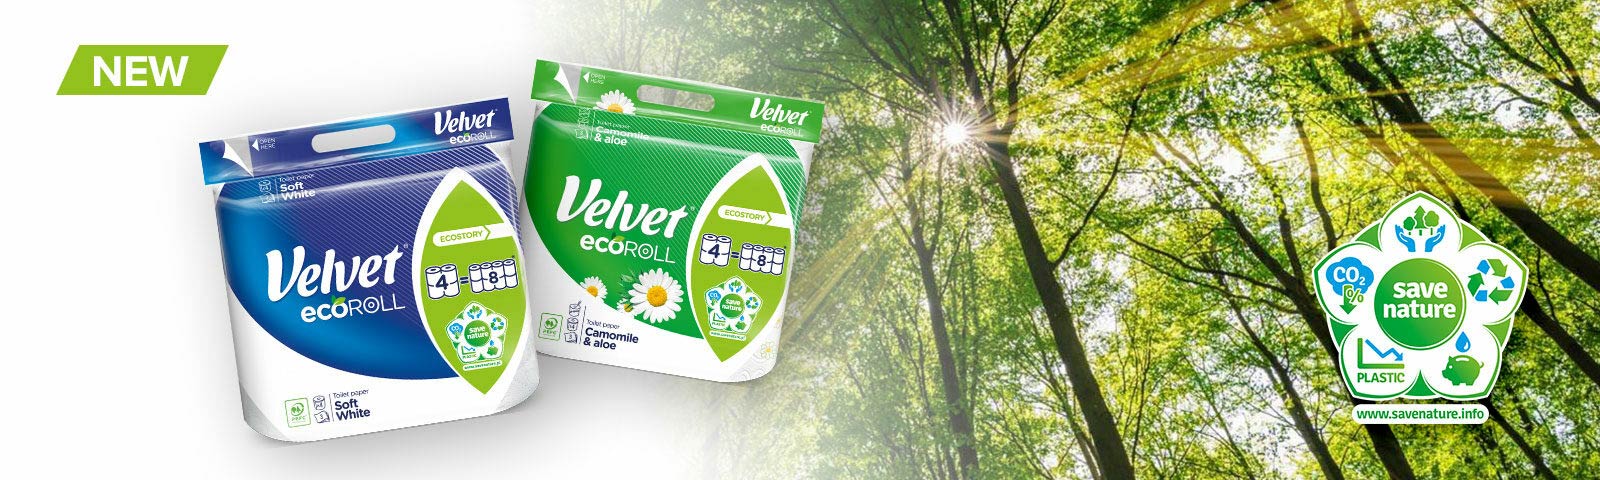 New Velvet ecoROLL – eco-friendly toilet paper created with nature in mind